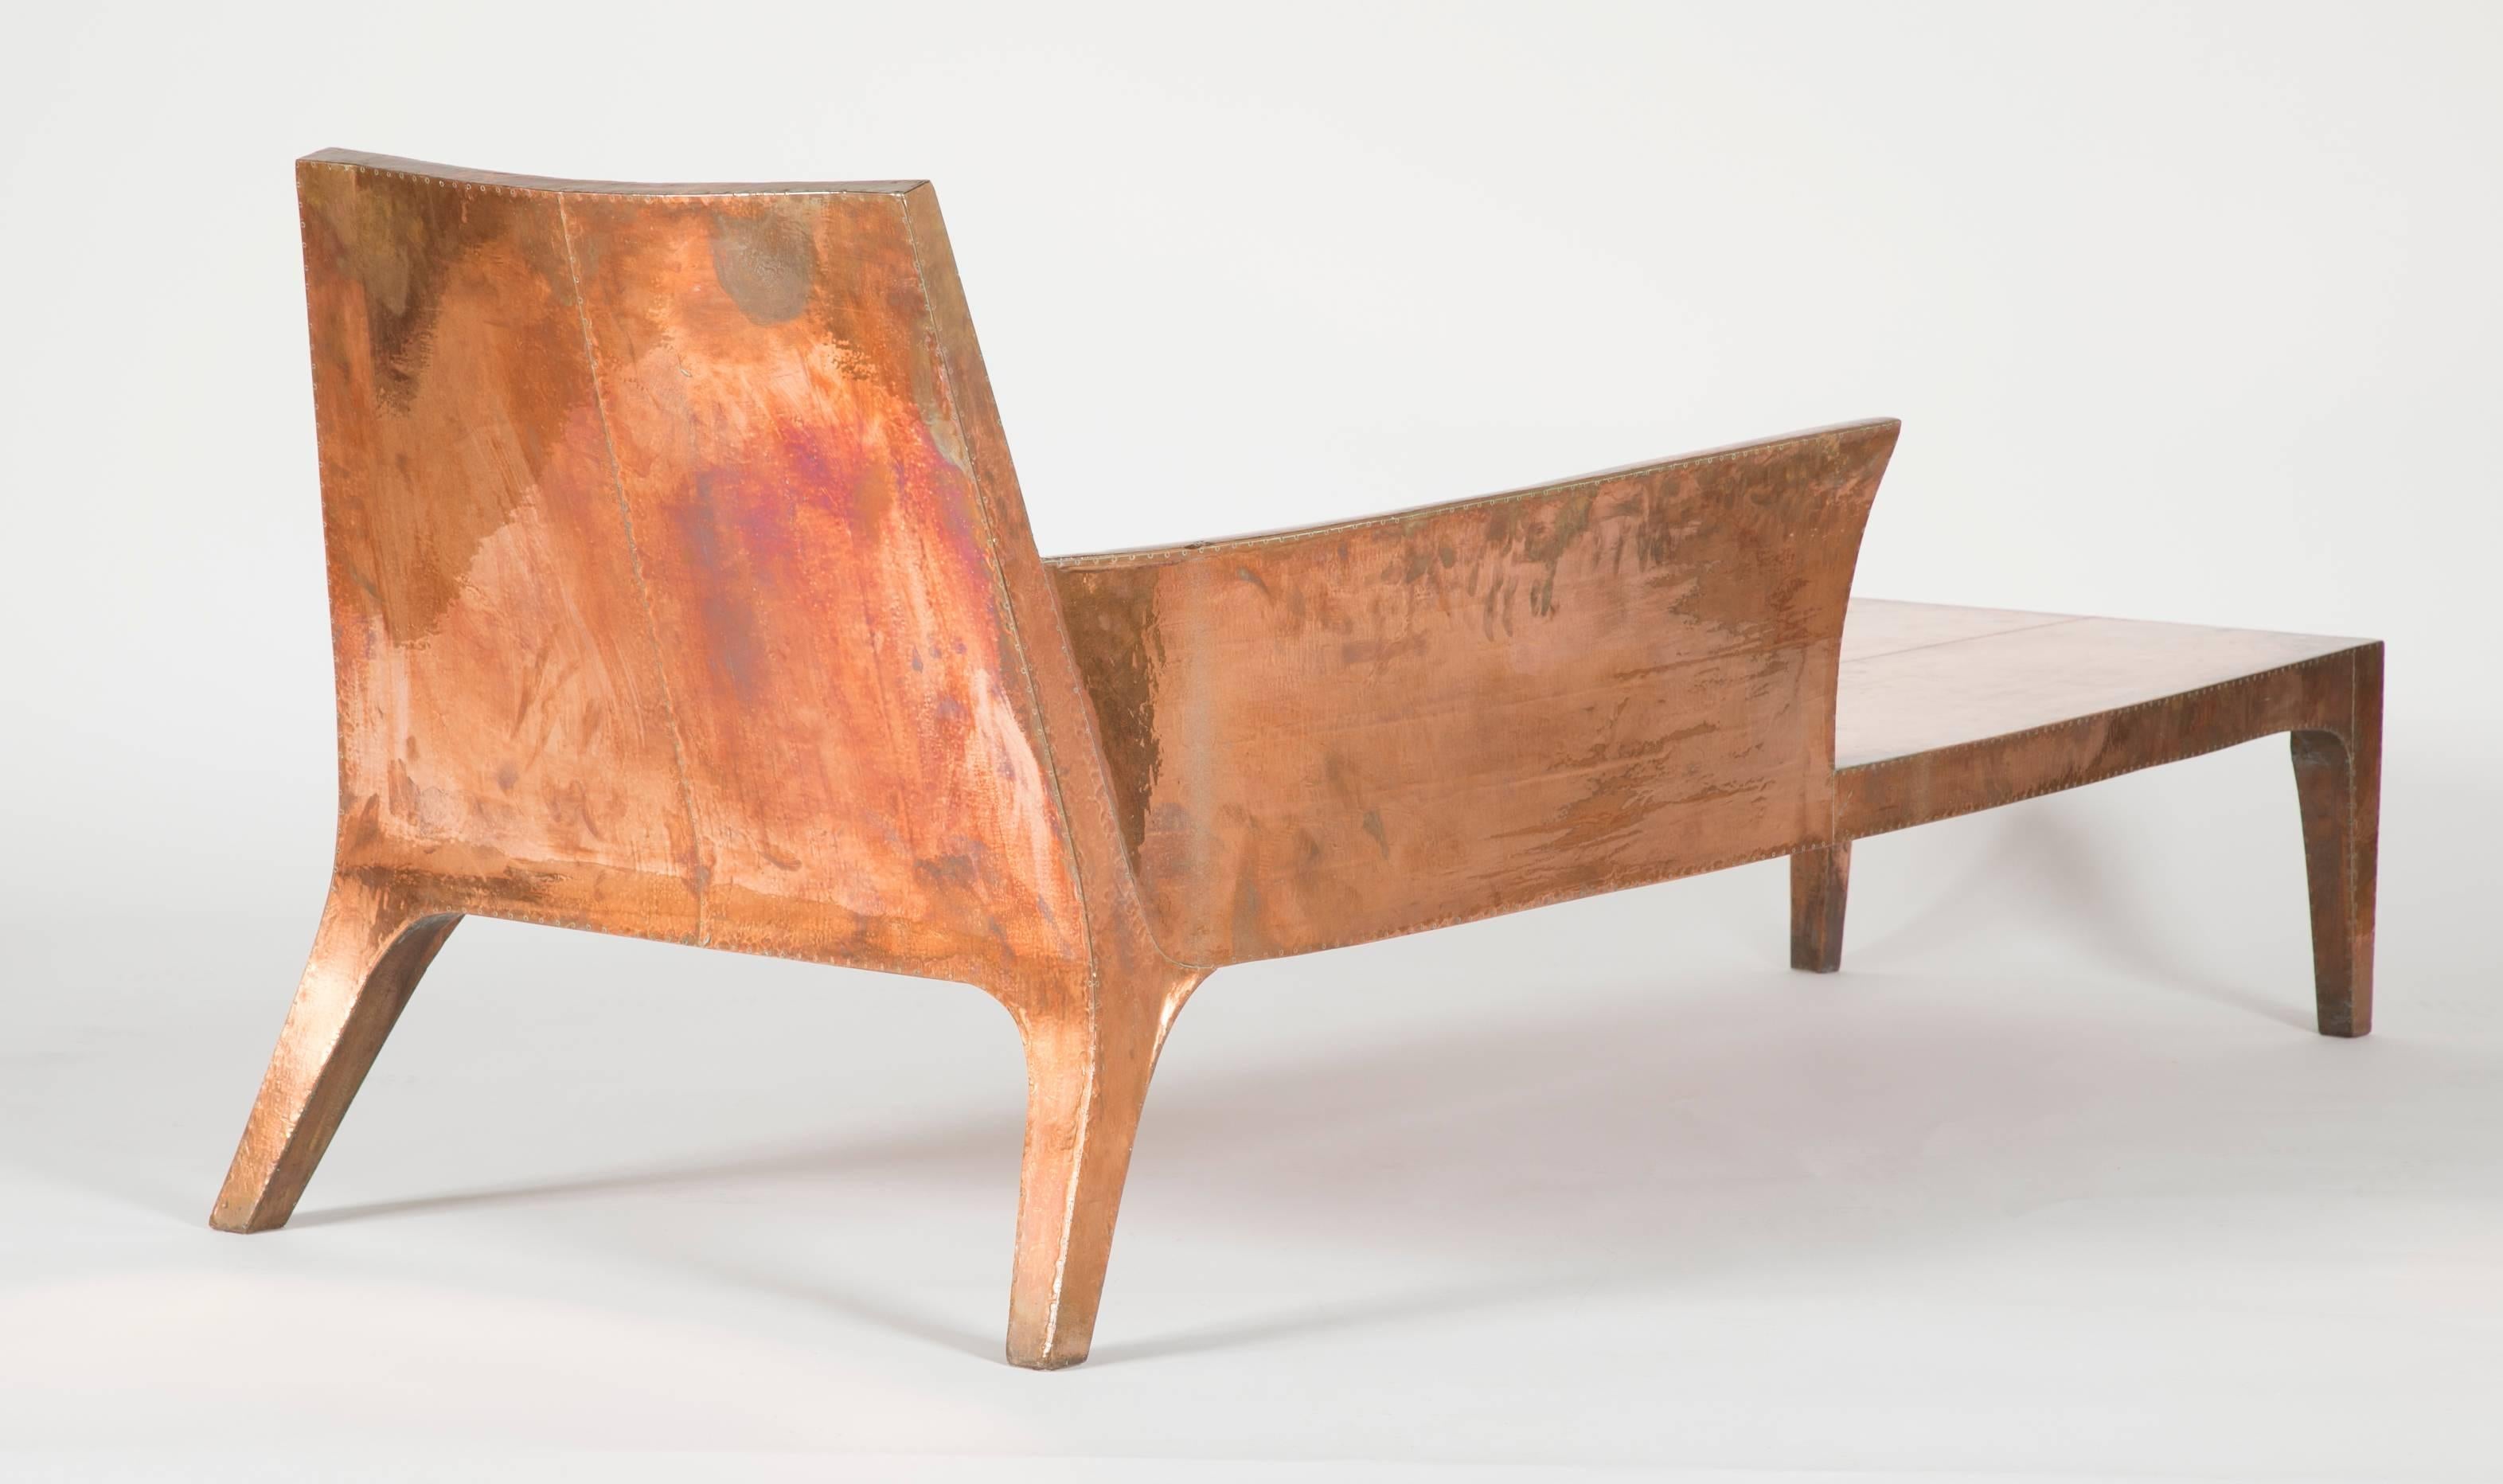 Indian Copper Clad Chaise Designed by Paul Mathieu for Stephanie Odegard Co. Ltd. 